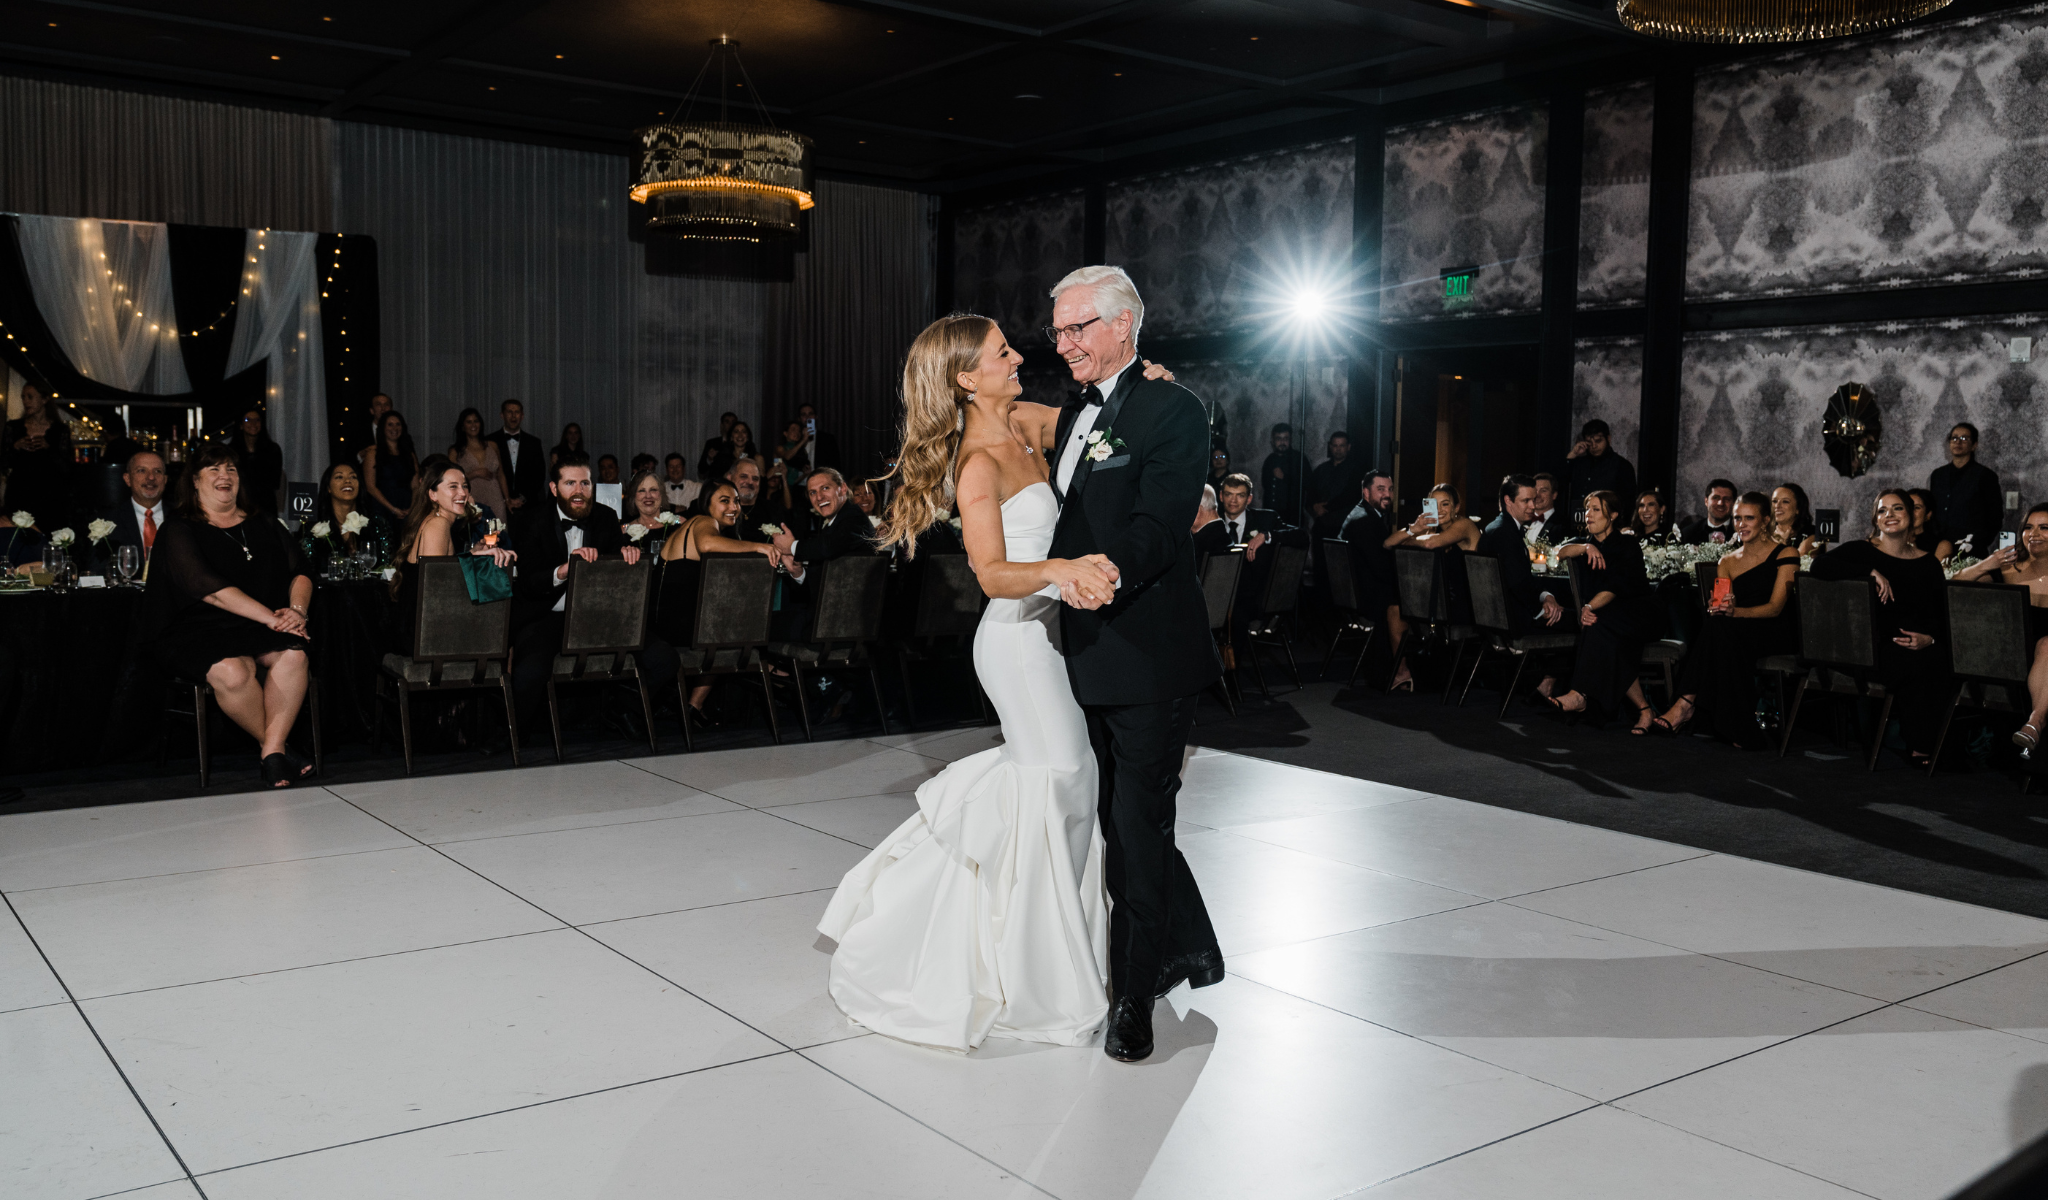 daddy-daughter-dance-with-bride-with-drop-lights-and-crowd-in-awe